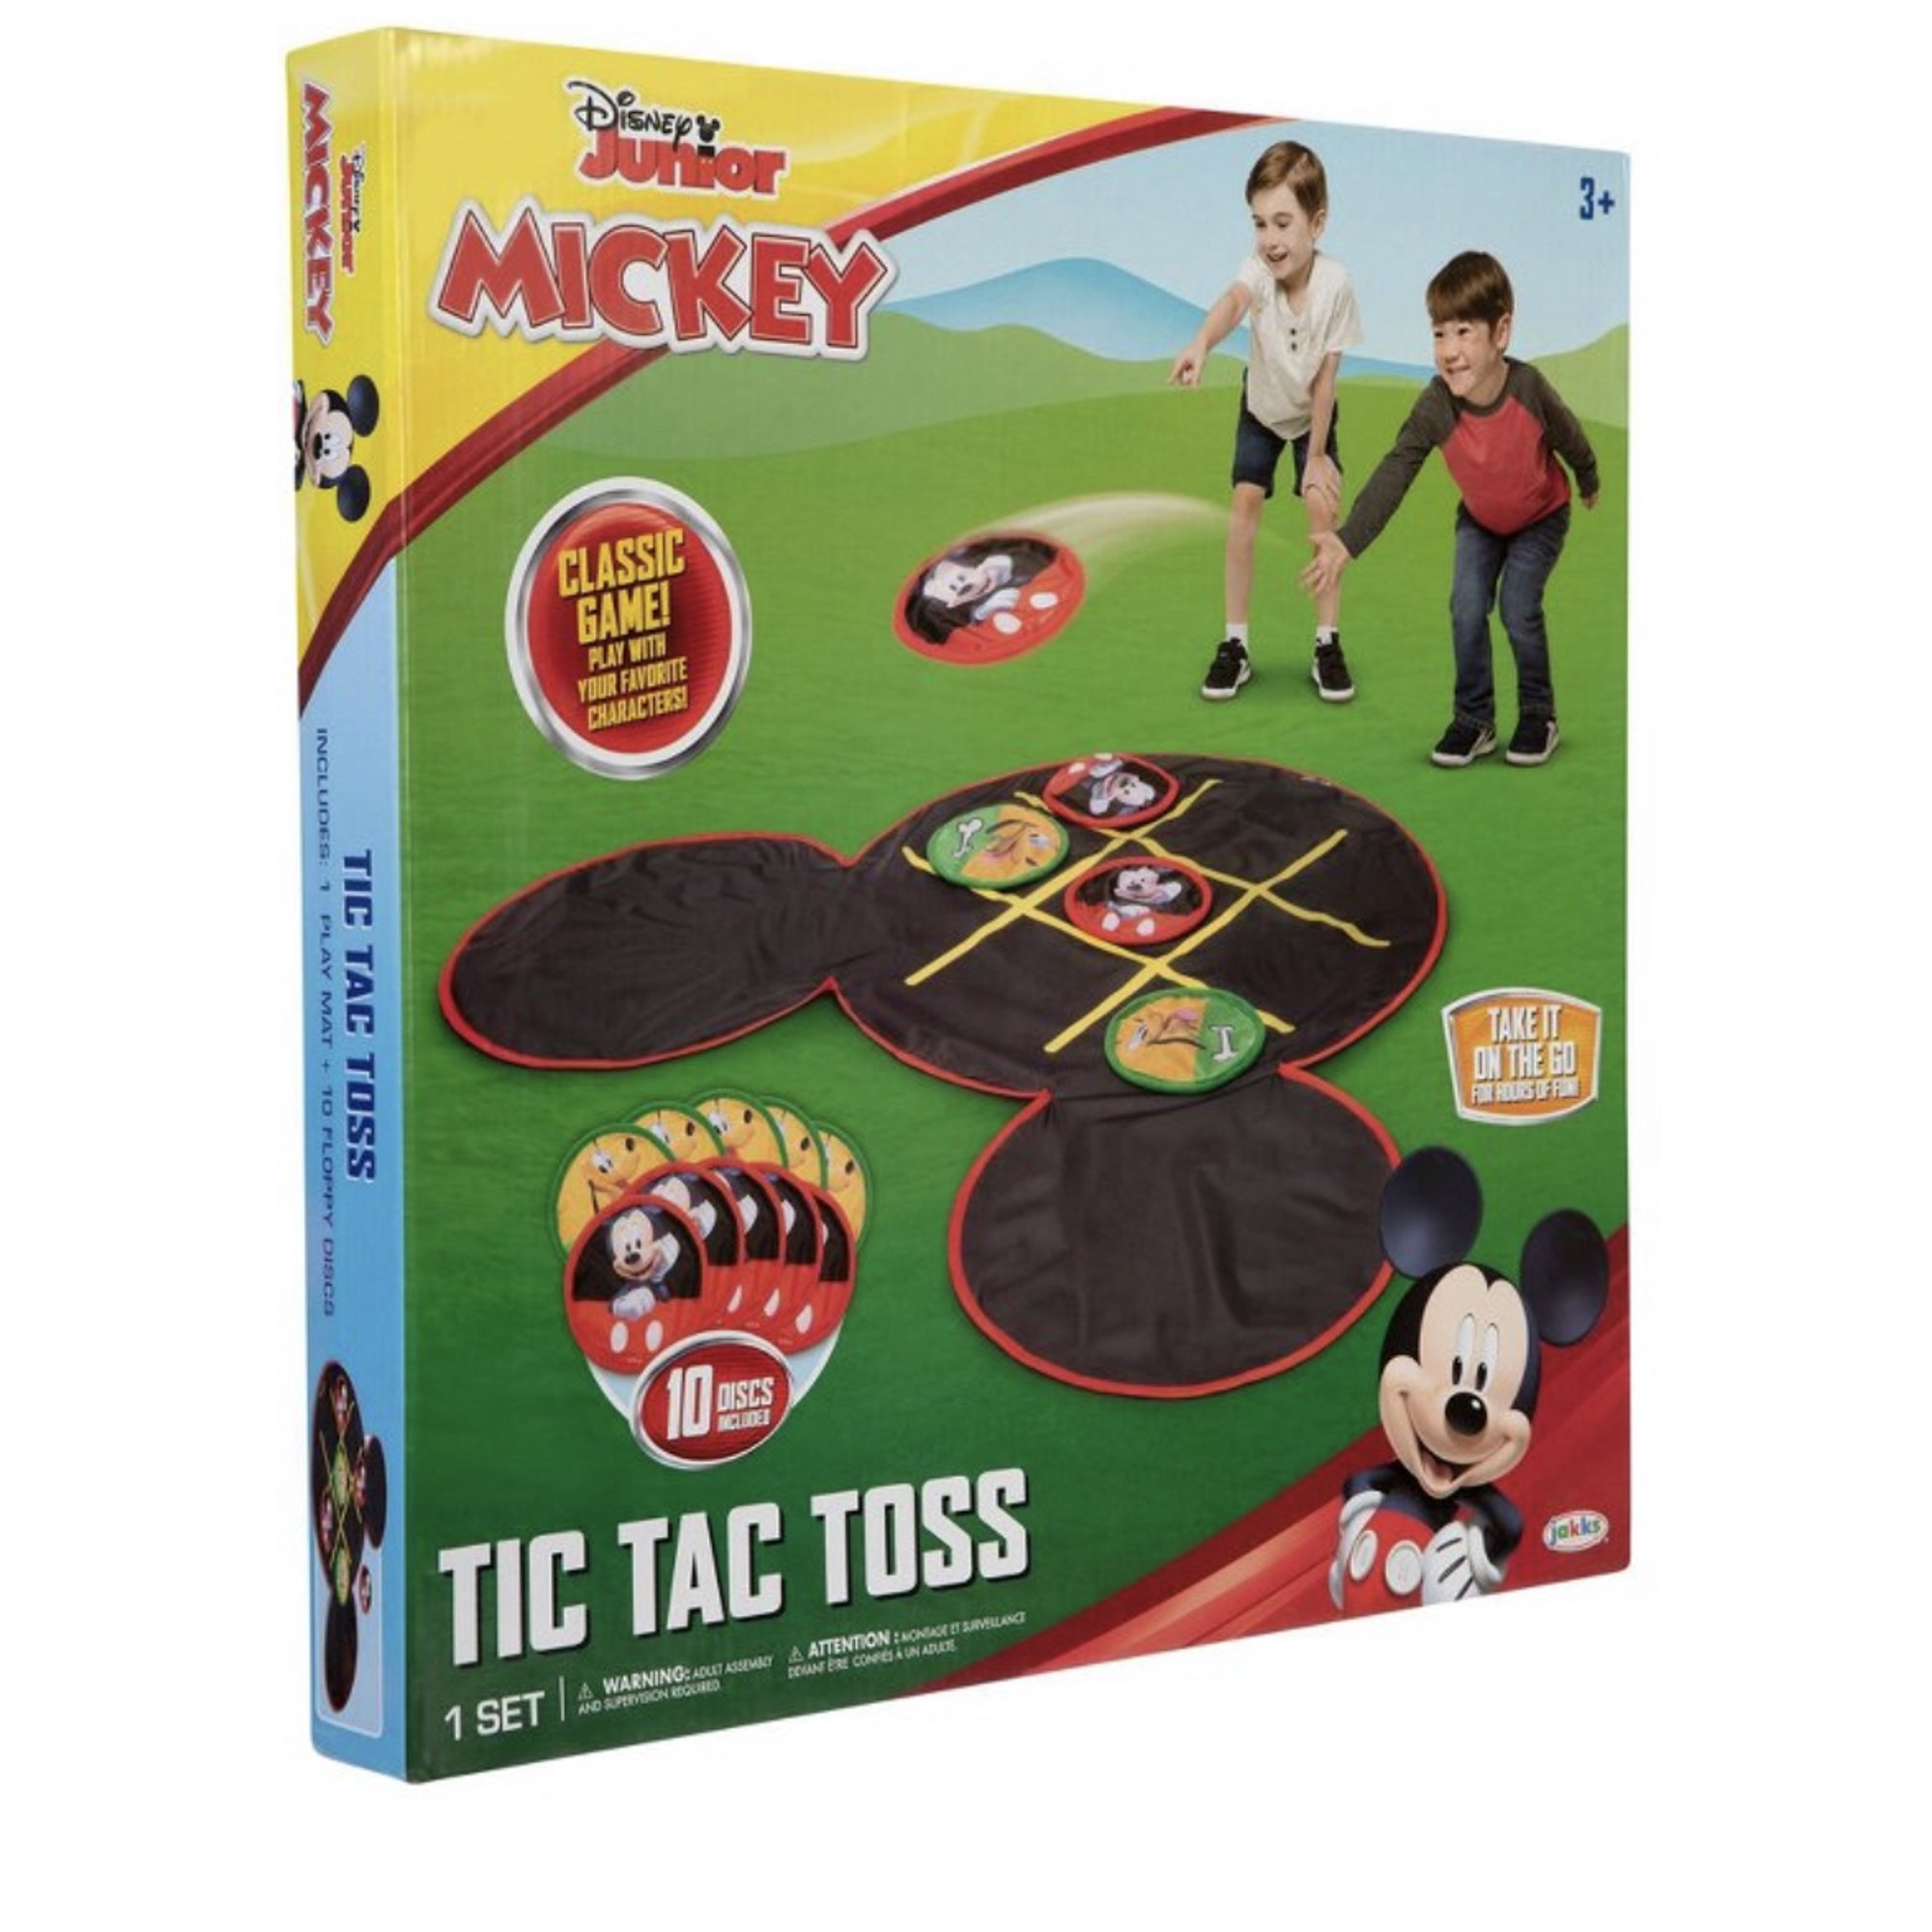 Mickey Tic-Tac-Toss Game